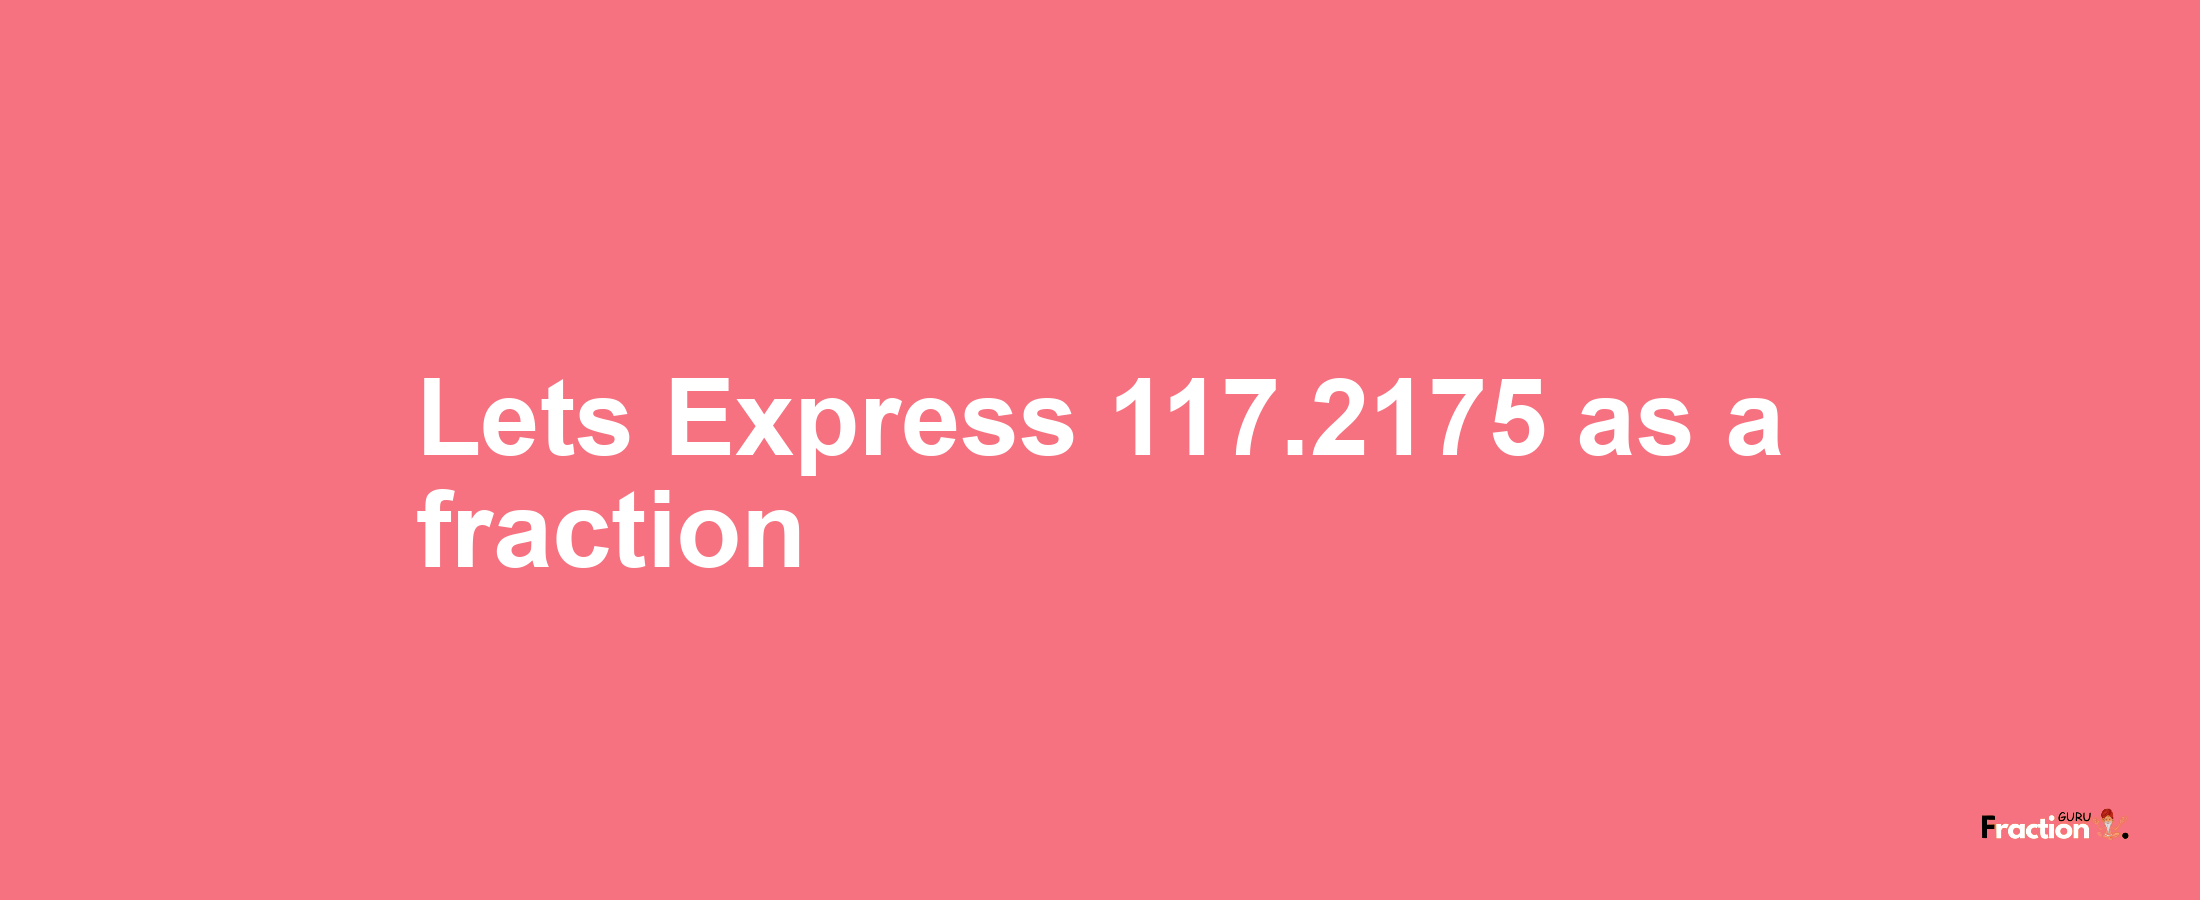 Lets Express 117.2175 as afraction